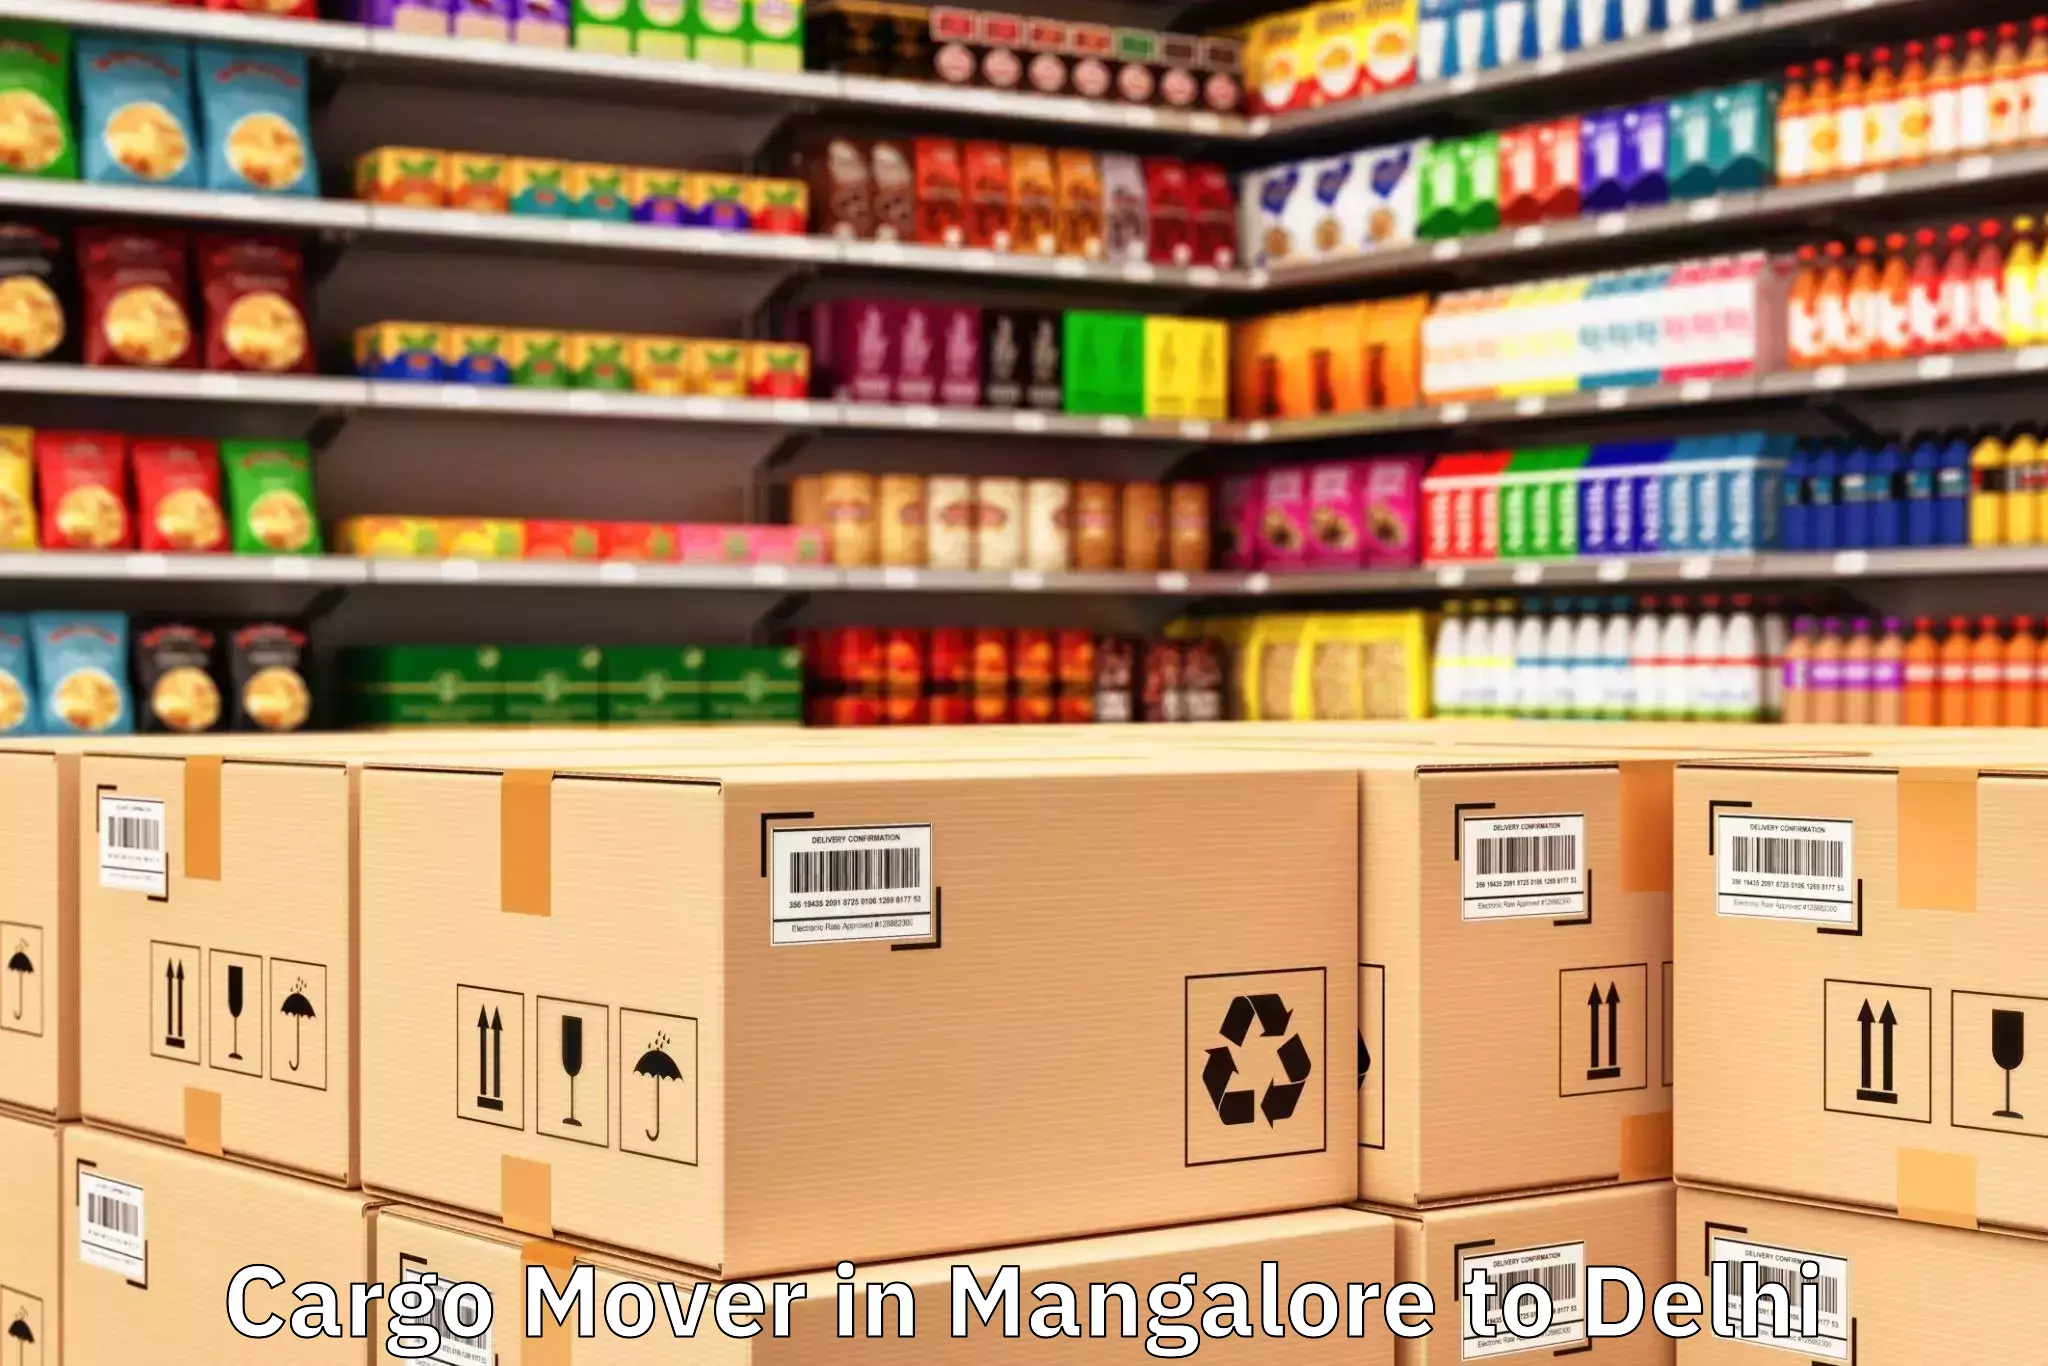 Mangalore to The Indian Law Institute New Delhi Cargo Mover Booking